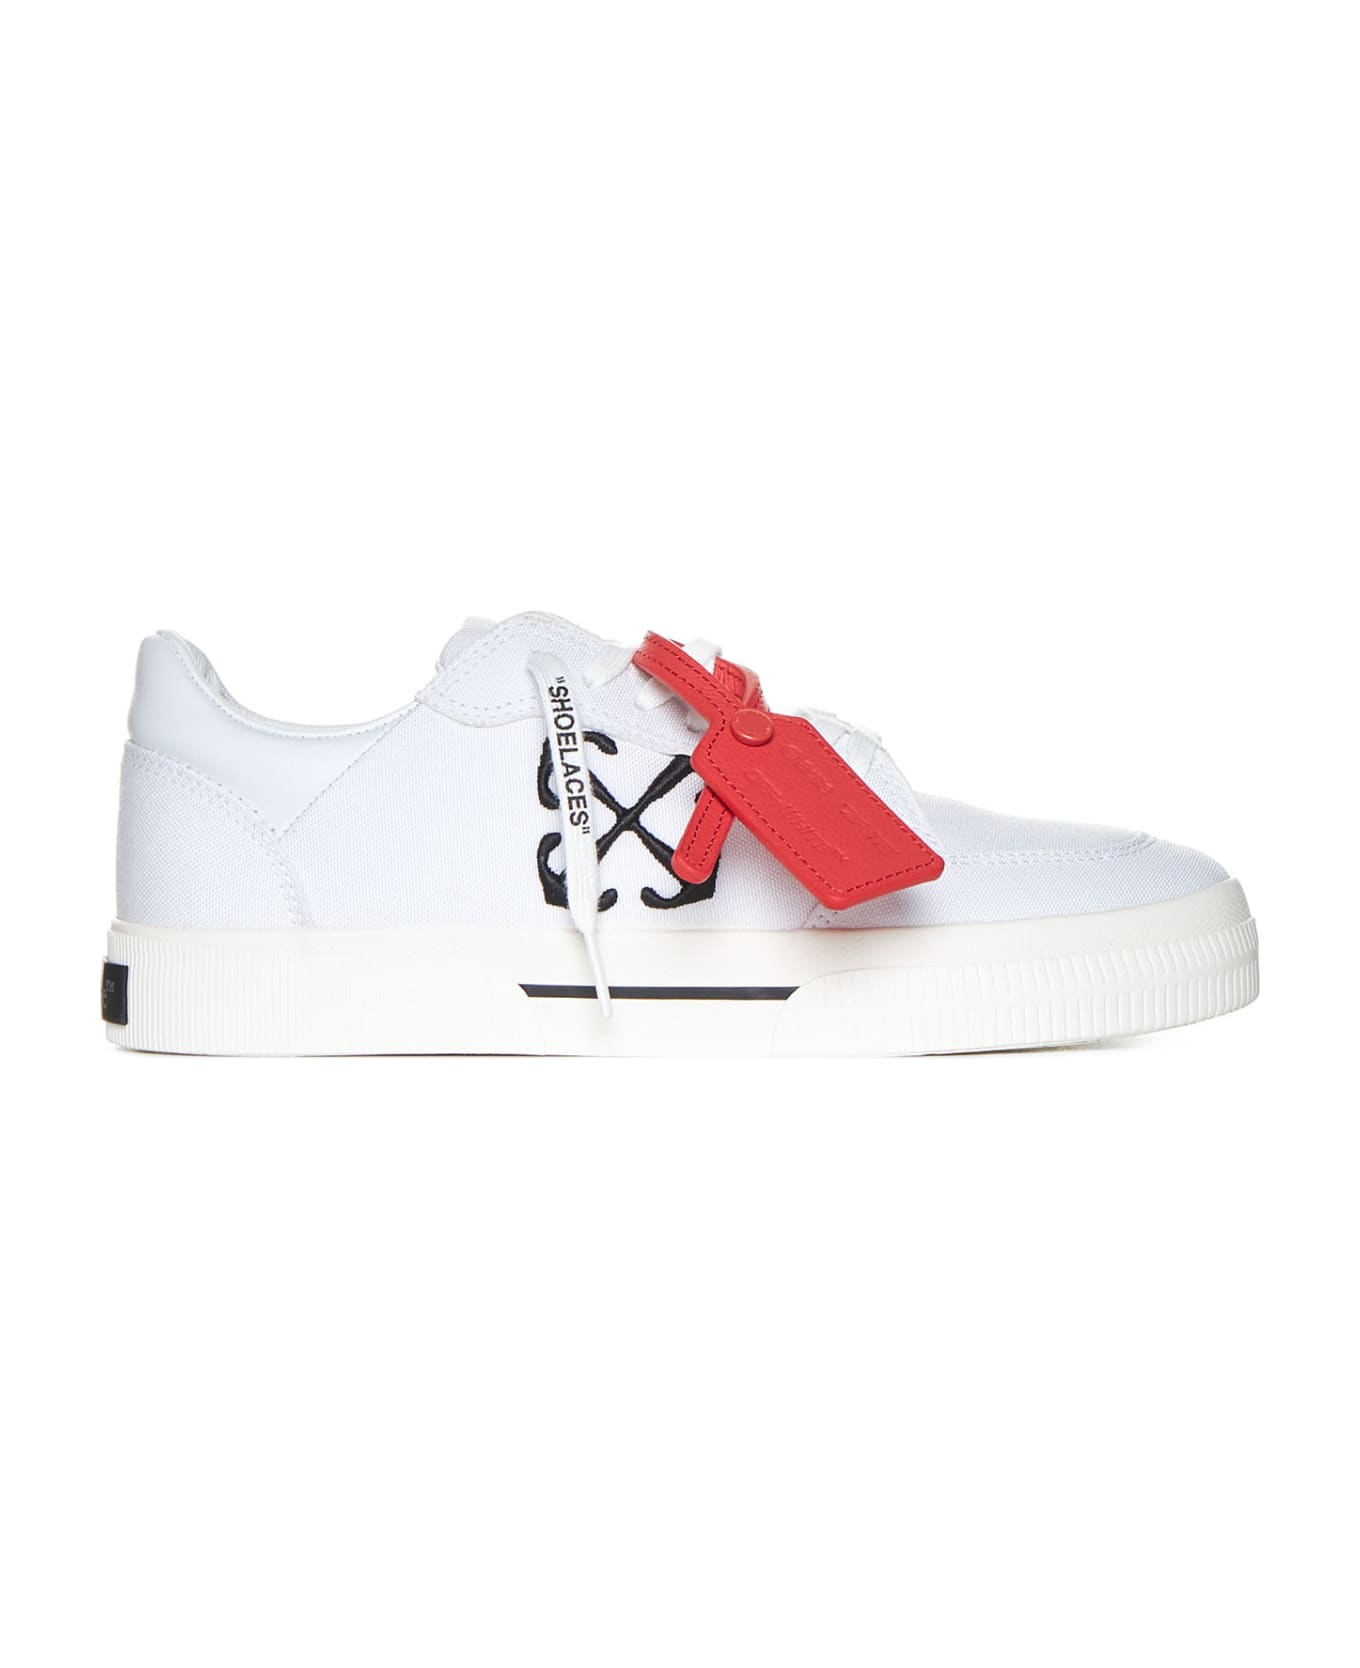 Off-White New Low Vulcanized Sneakers - White